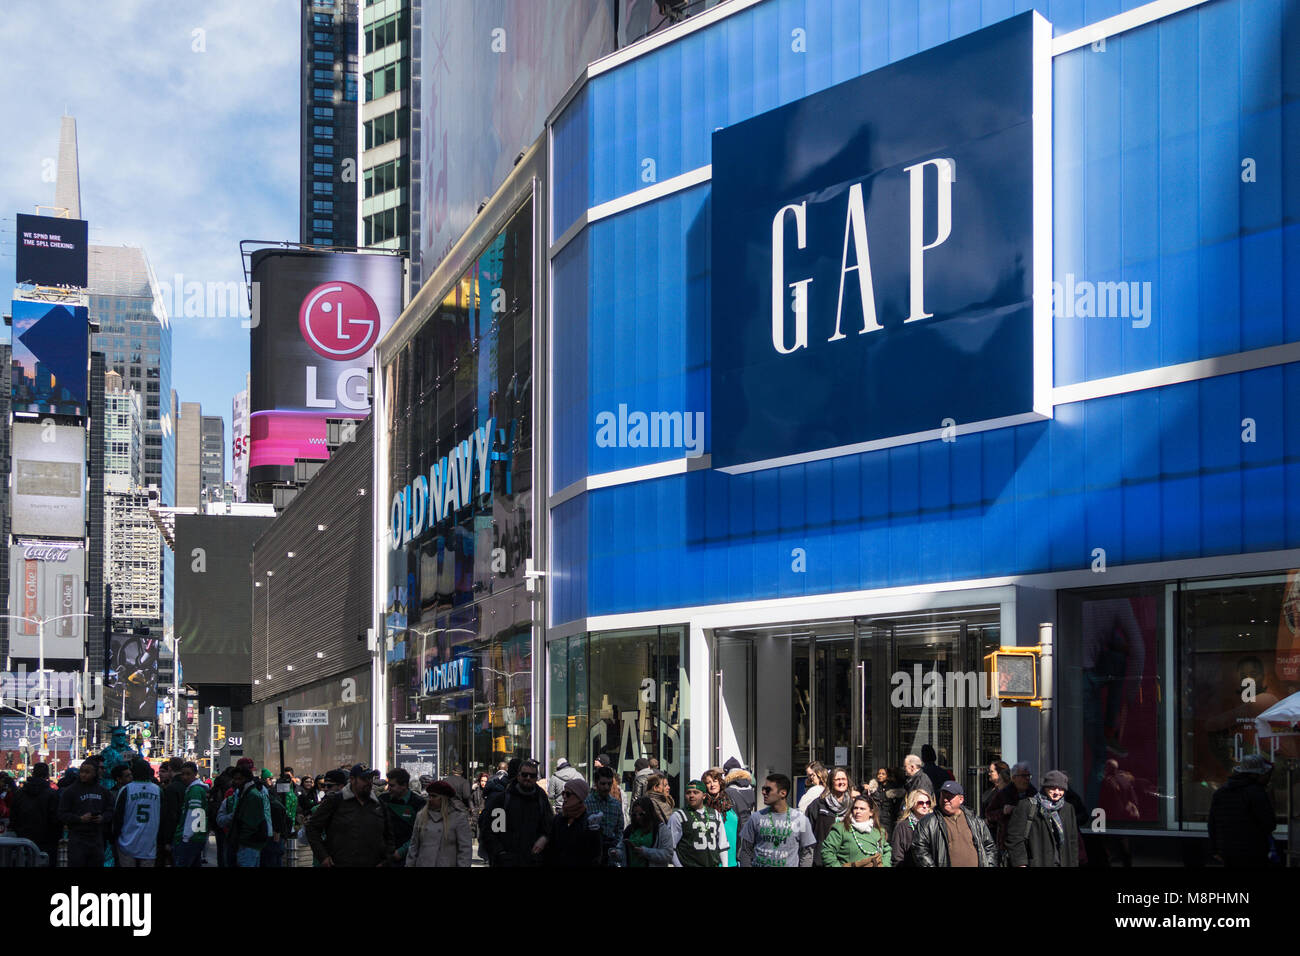 The Gap Advertising Screens in Times Square, NYC, USA Stock Photo - Alamy